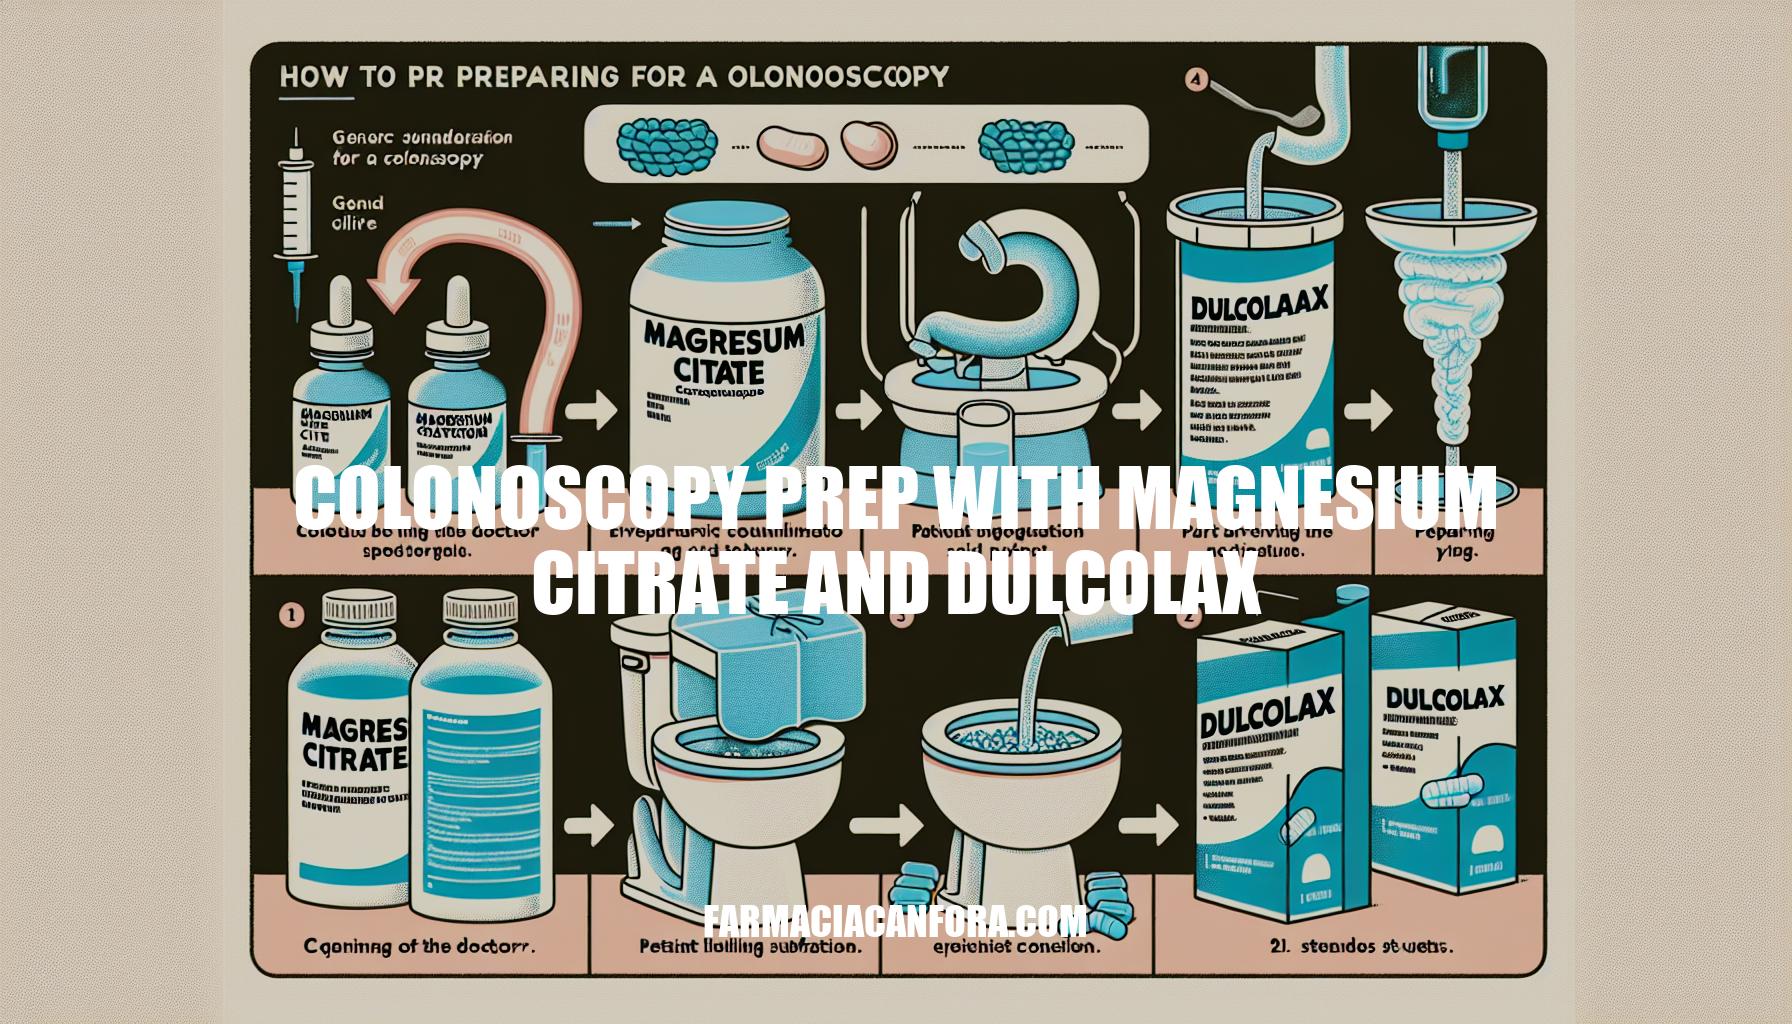 Colonoscopy Prep with Magnesium Citrate and Dulcolax: A Complete Guide